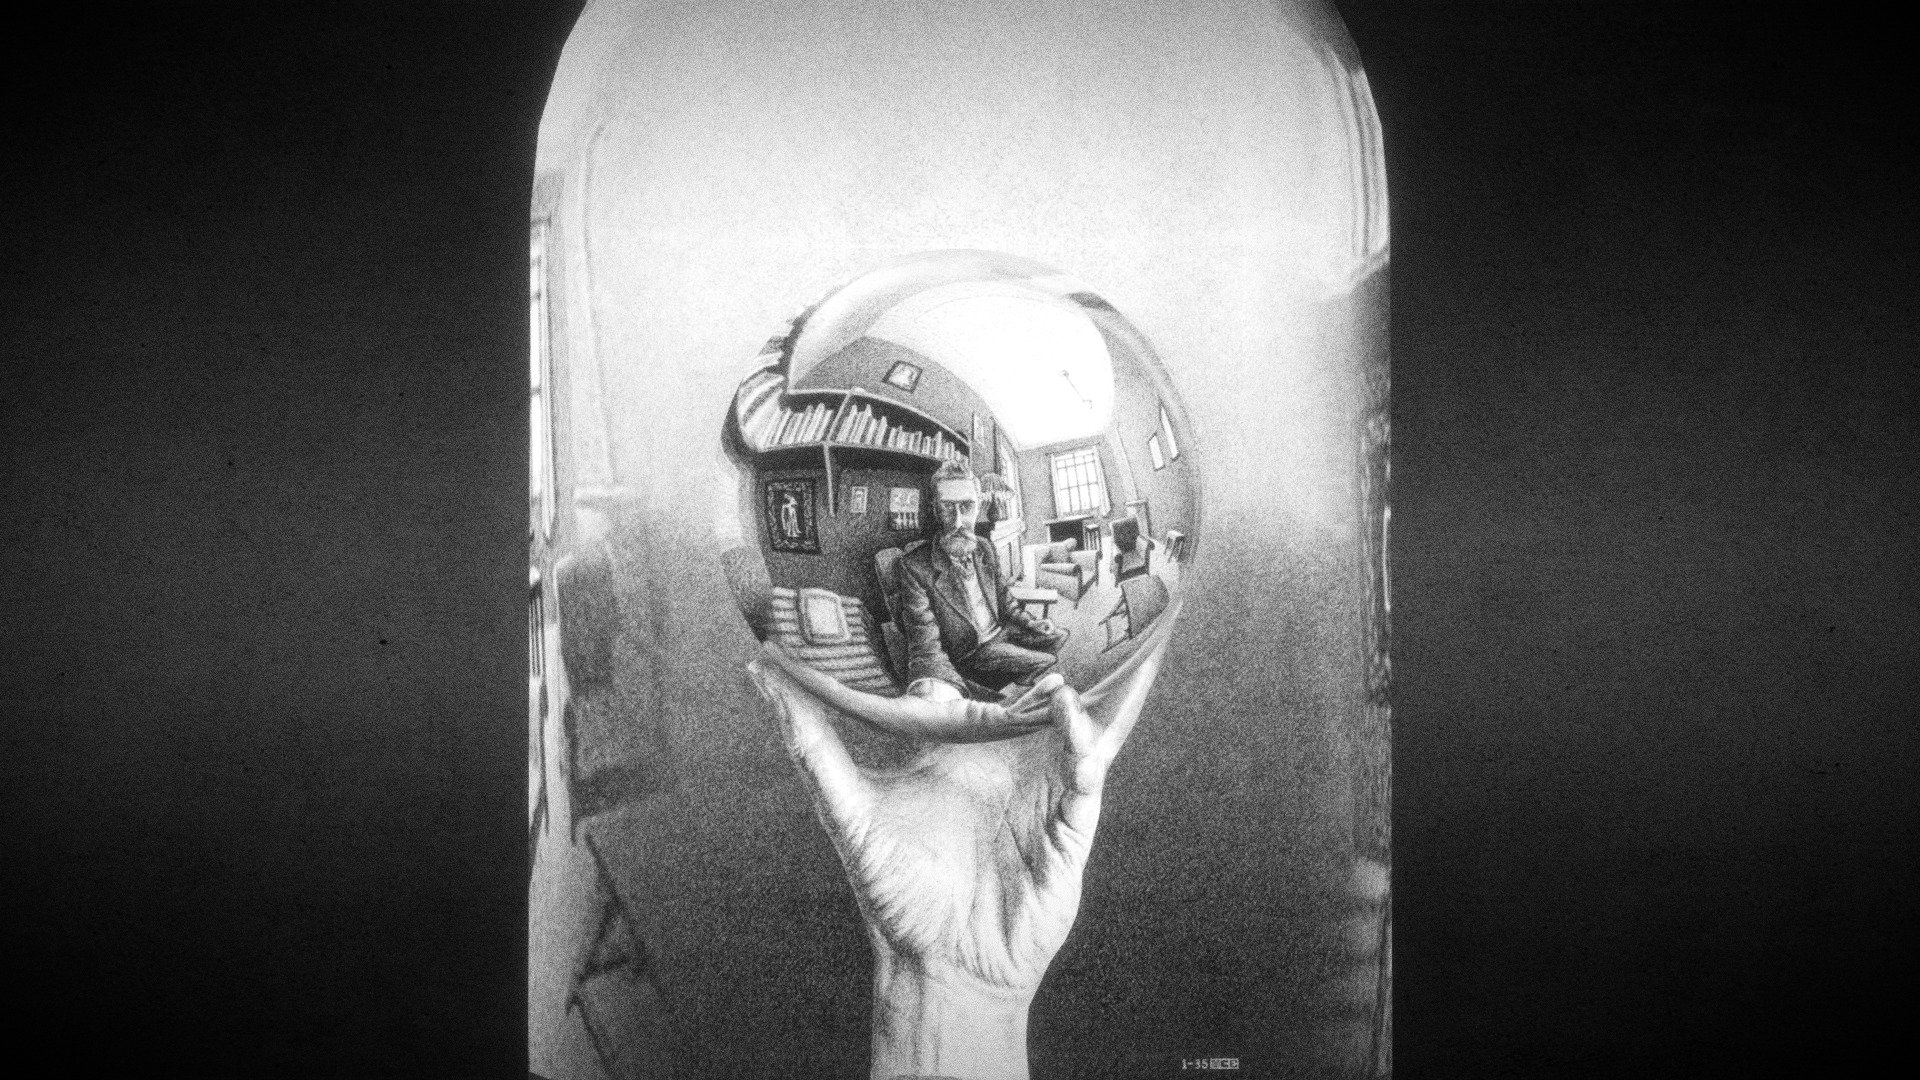 (2020) Hand with Reflecting Sphere 3D 

Here is a tribute to M.C. Escher (Jun 17, 1898 - Mar 27, 1972) with a 3D rendition of his famous Hand with Reflecting Sphere or Self-Portrait in Spherical Mirror (1935).


(2020) 手上的球體反射 3D

這3D動畫是對錯視藝術家莫里茲·柯尼利斯·艾雪 (Jun 17, 1898 - Mar 27, 1972)的致敬，3D化了其著名的《手上的球體反射》(1935年)。


 - Hand with Reflecting Sphere 3D - 3D model by hinxlinx 3d model